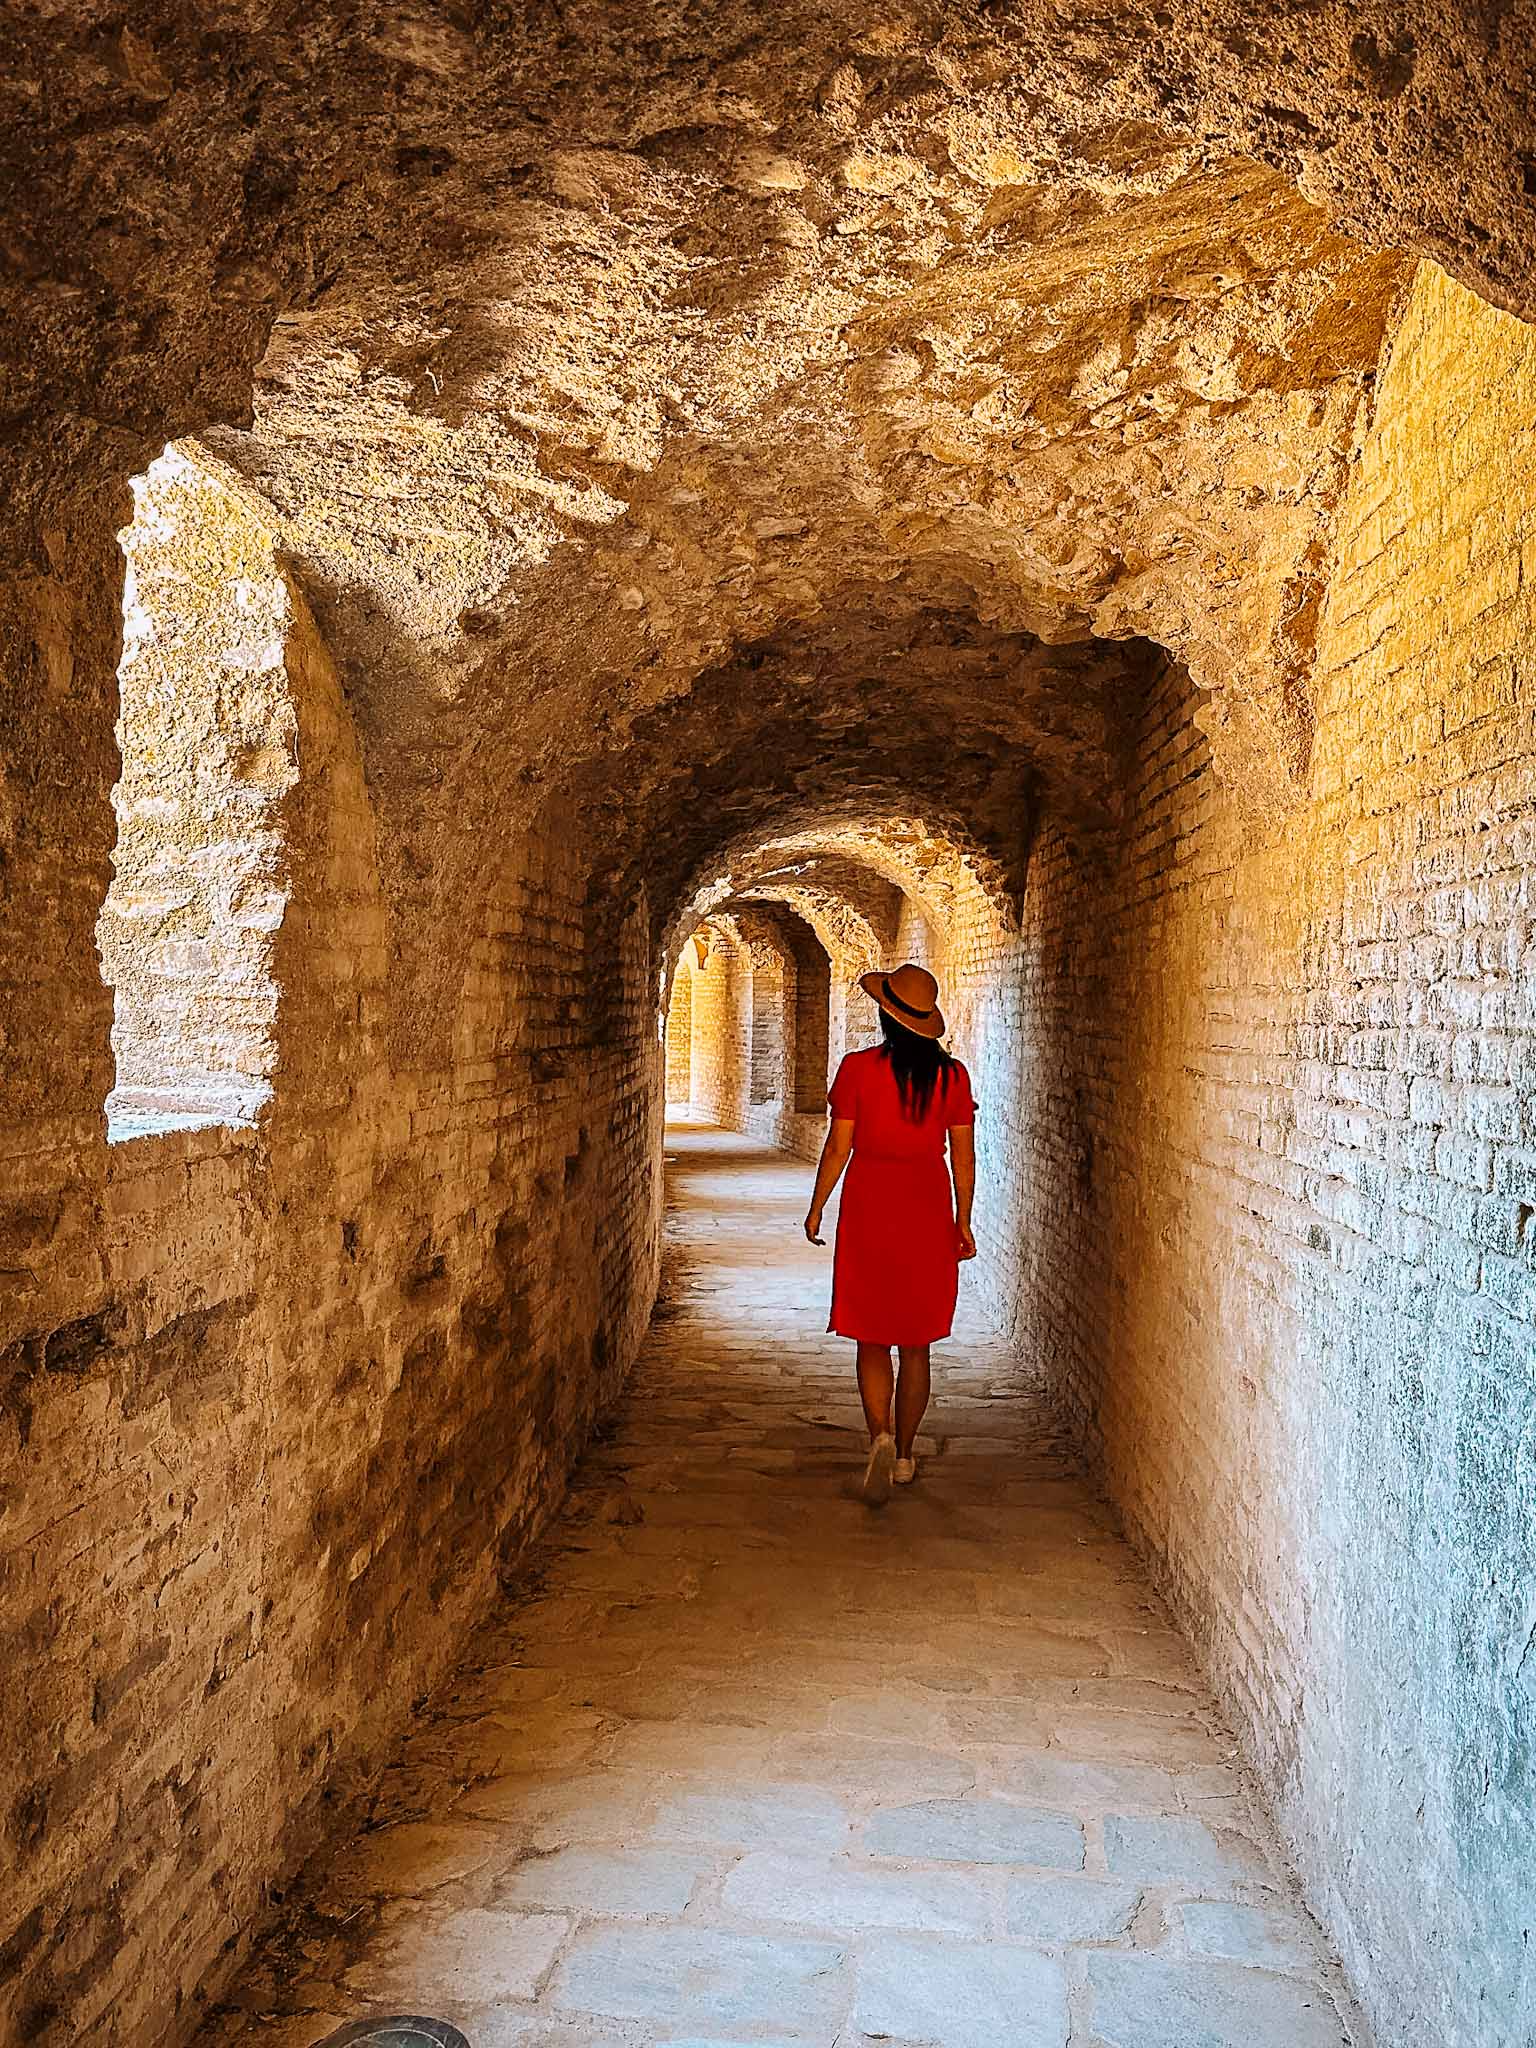 Hidden gems in Andalusia - Italica, an ancient Roman city near Seville